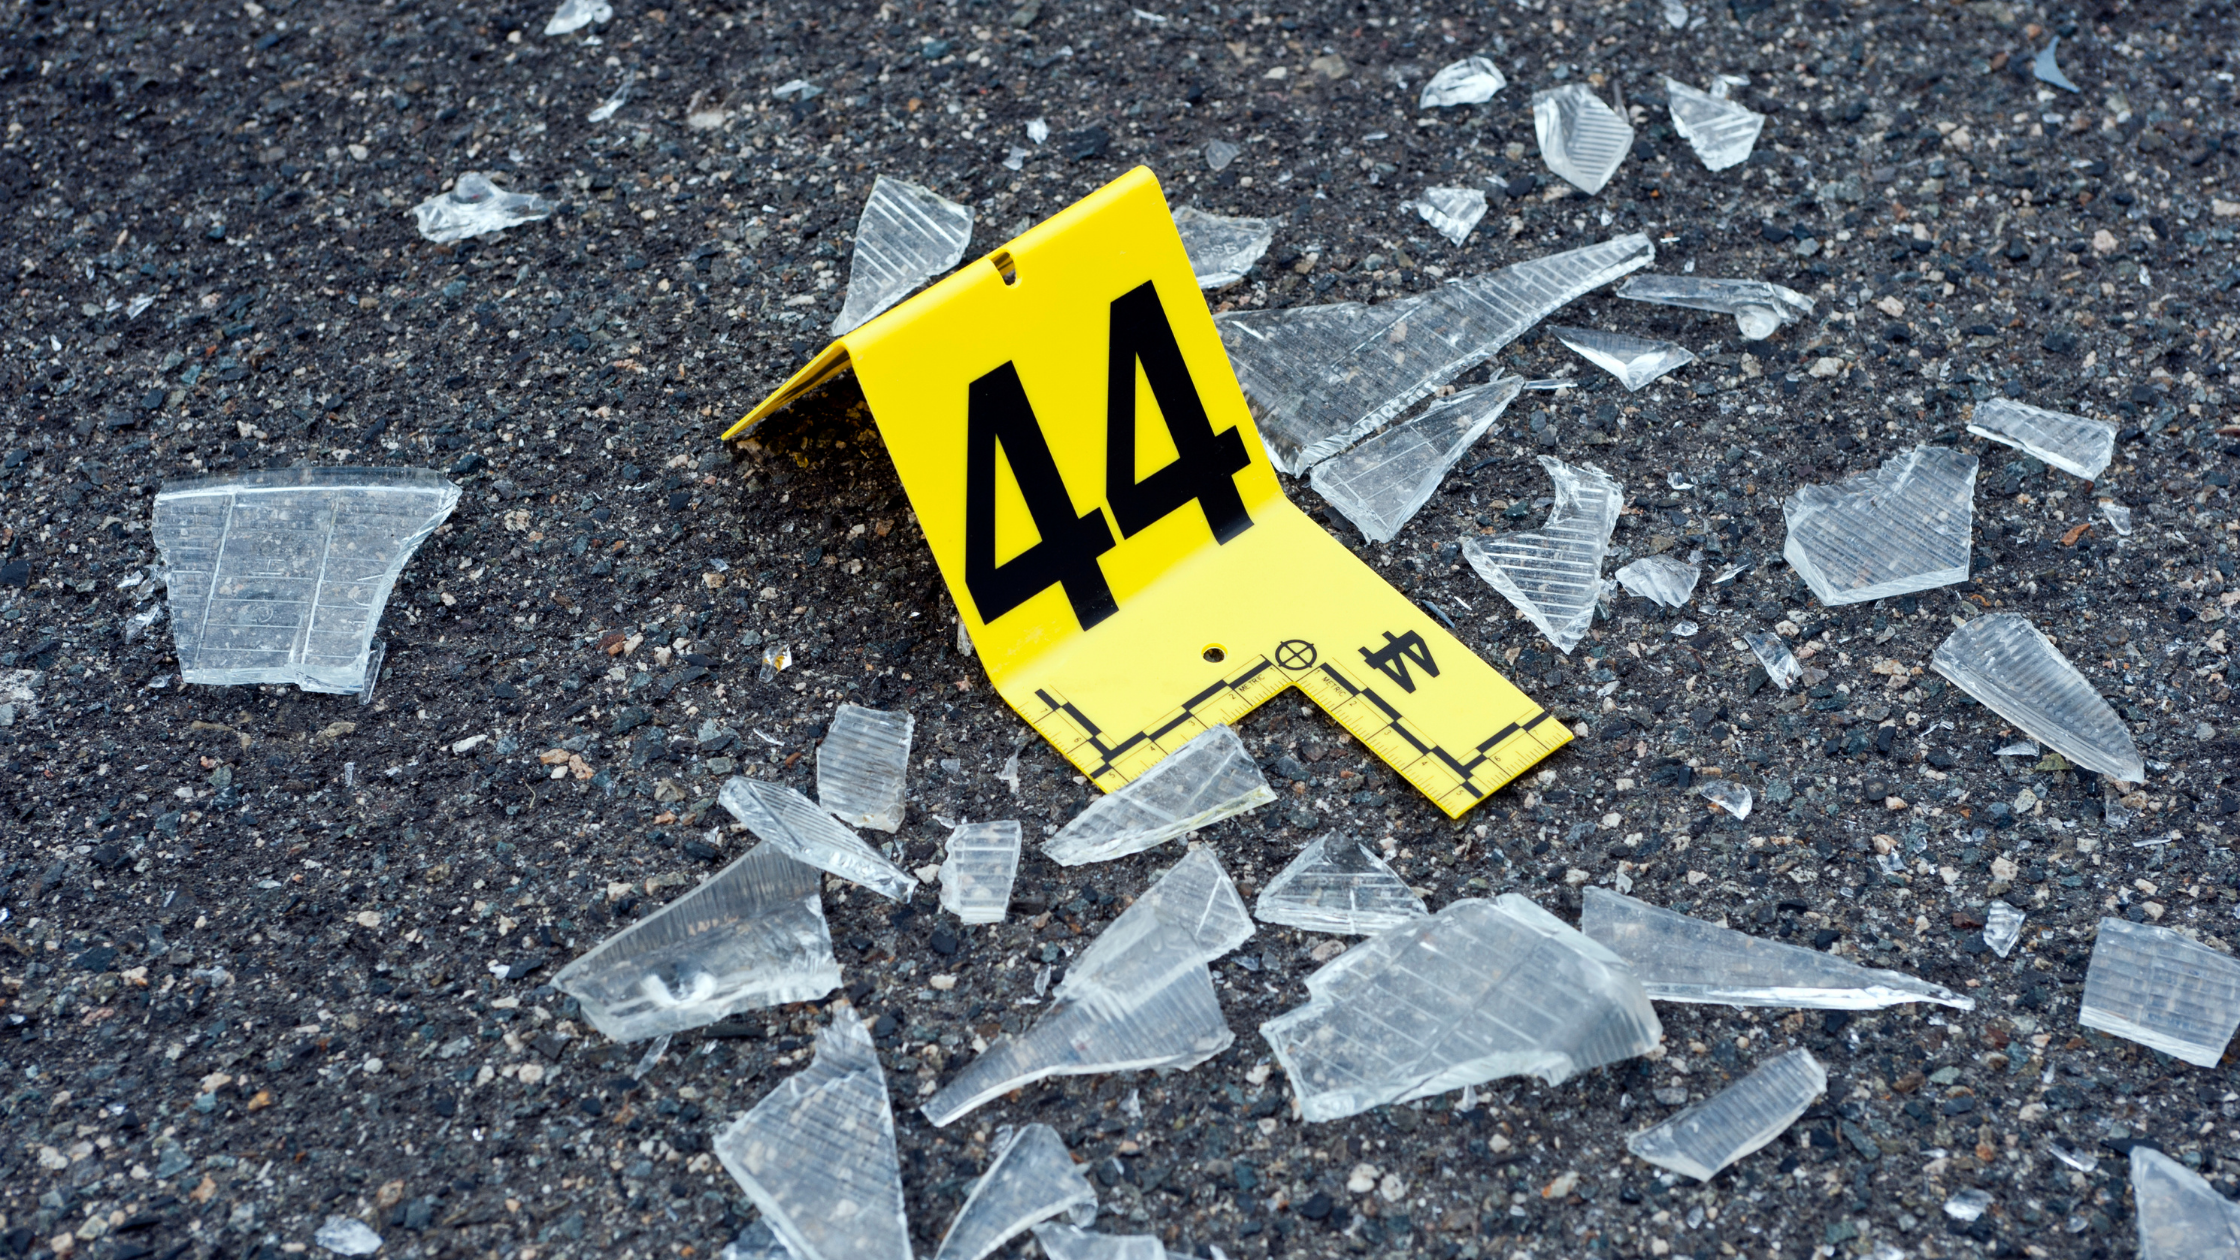 Shattered glass marked with a crime scene trace evidence examiner.